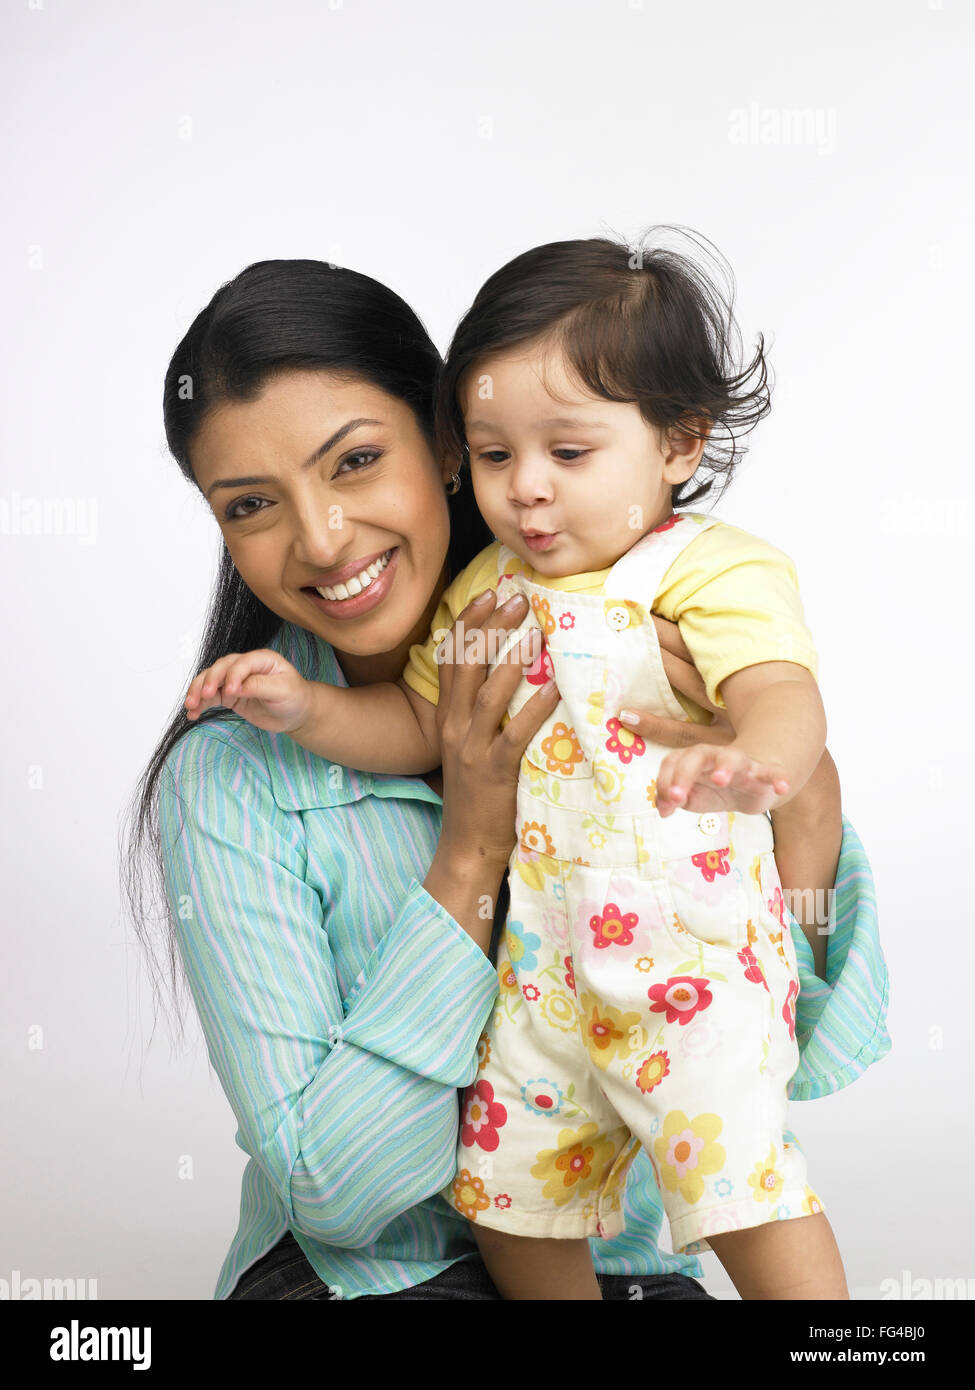 woman baby, mother child, Indian mother with baby girl, MR ...